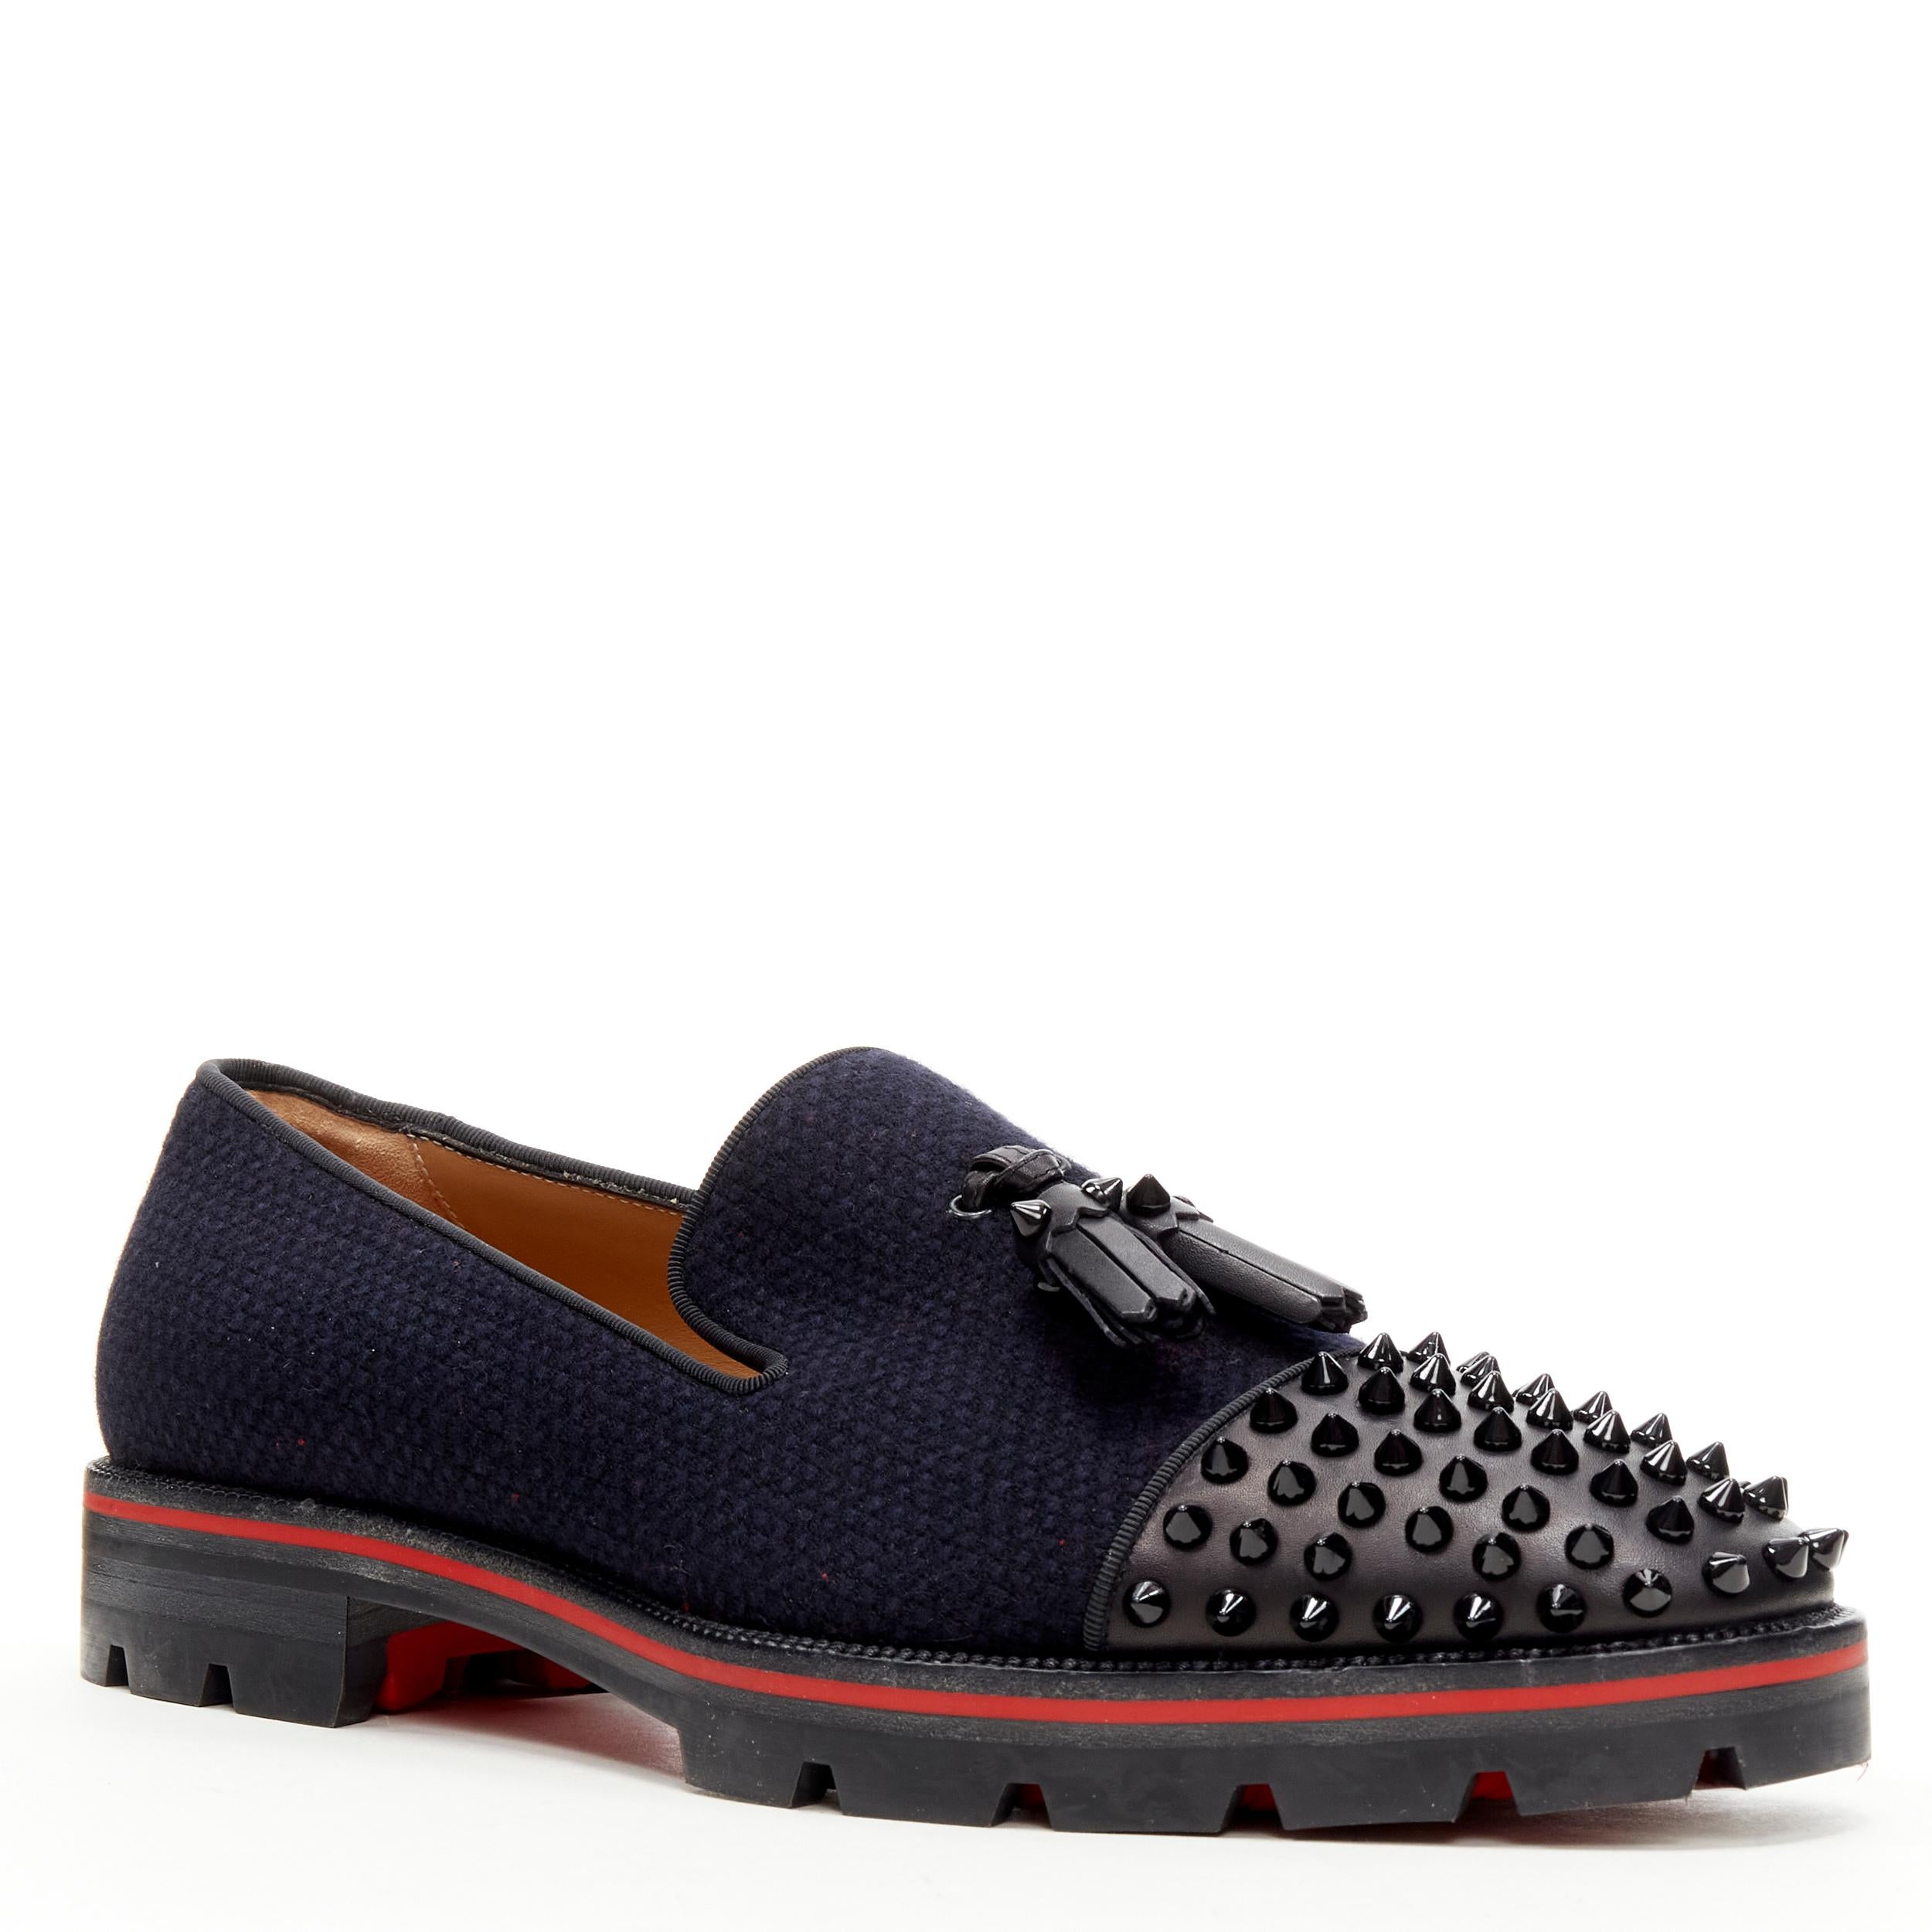 new CHRISTIAN LOUBOUTIN Rossini Flat navy tweed spike toe tassel lug sole EU42 
Reference: TGAS/C01122 
Brand: Christian Louboutin 
Designer: Christian Louboutin 
Model: Rossini Flat 
Material: Wool 
Color: Navy 
Pattern: Solid 
Extra Detail: Navy